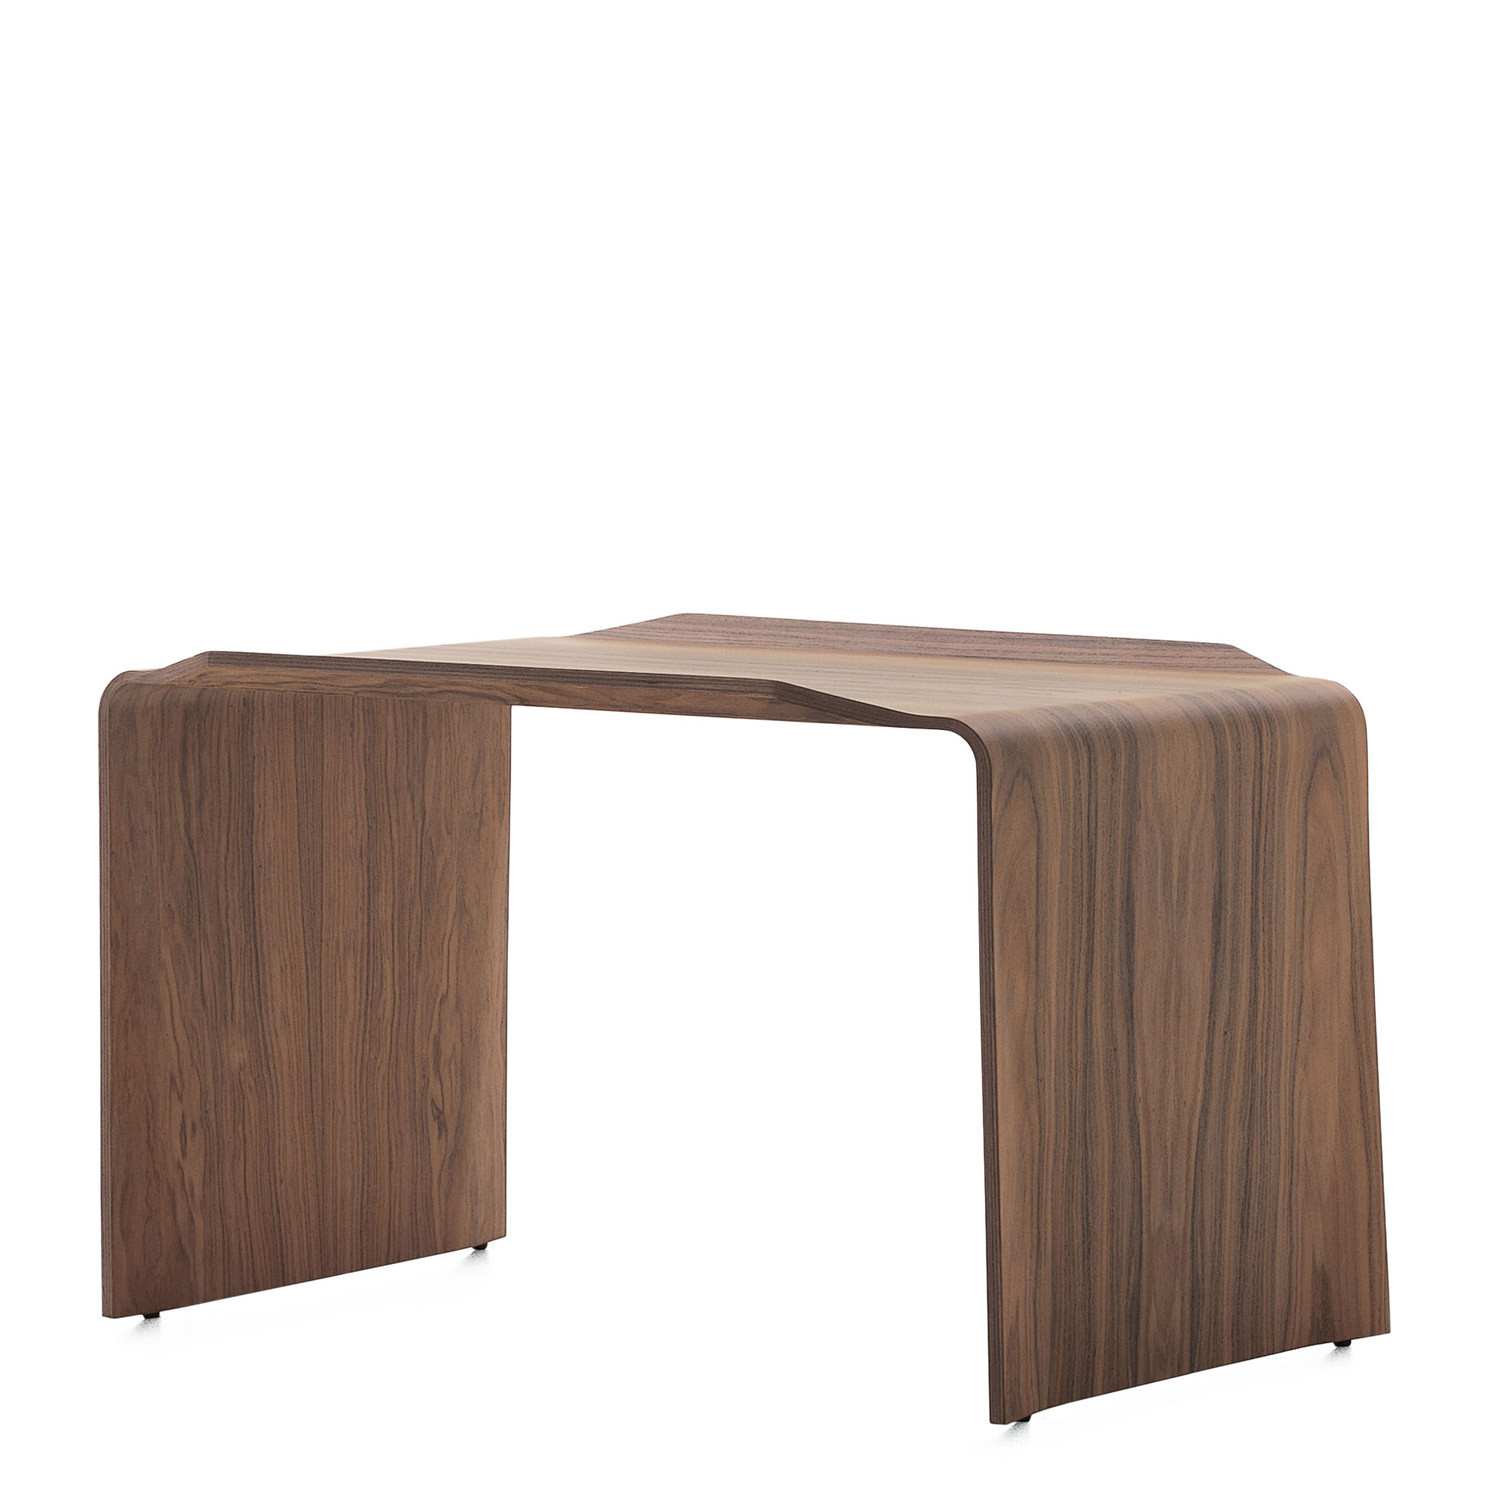 Pilot Table by Cappellini